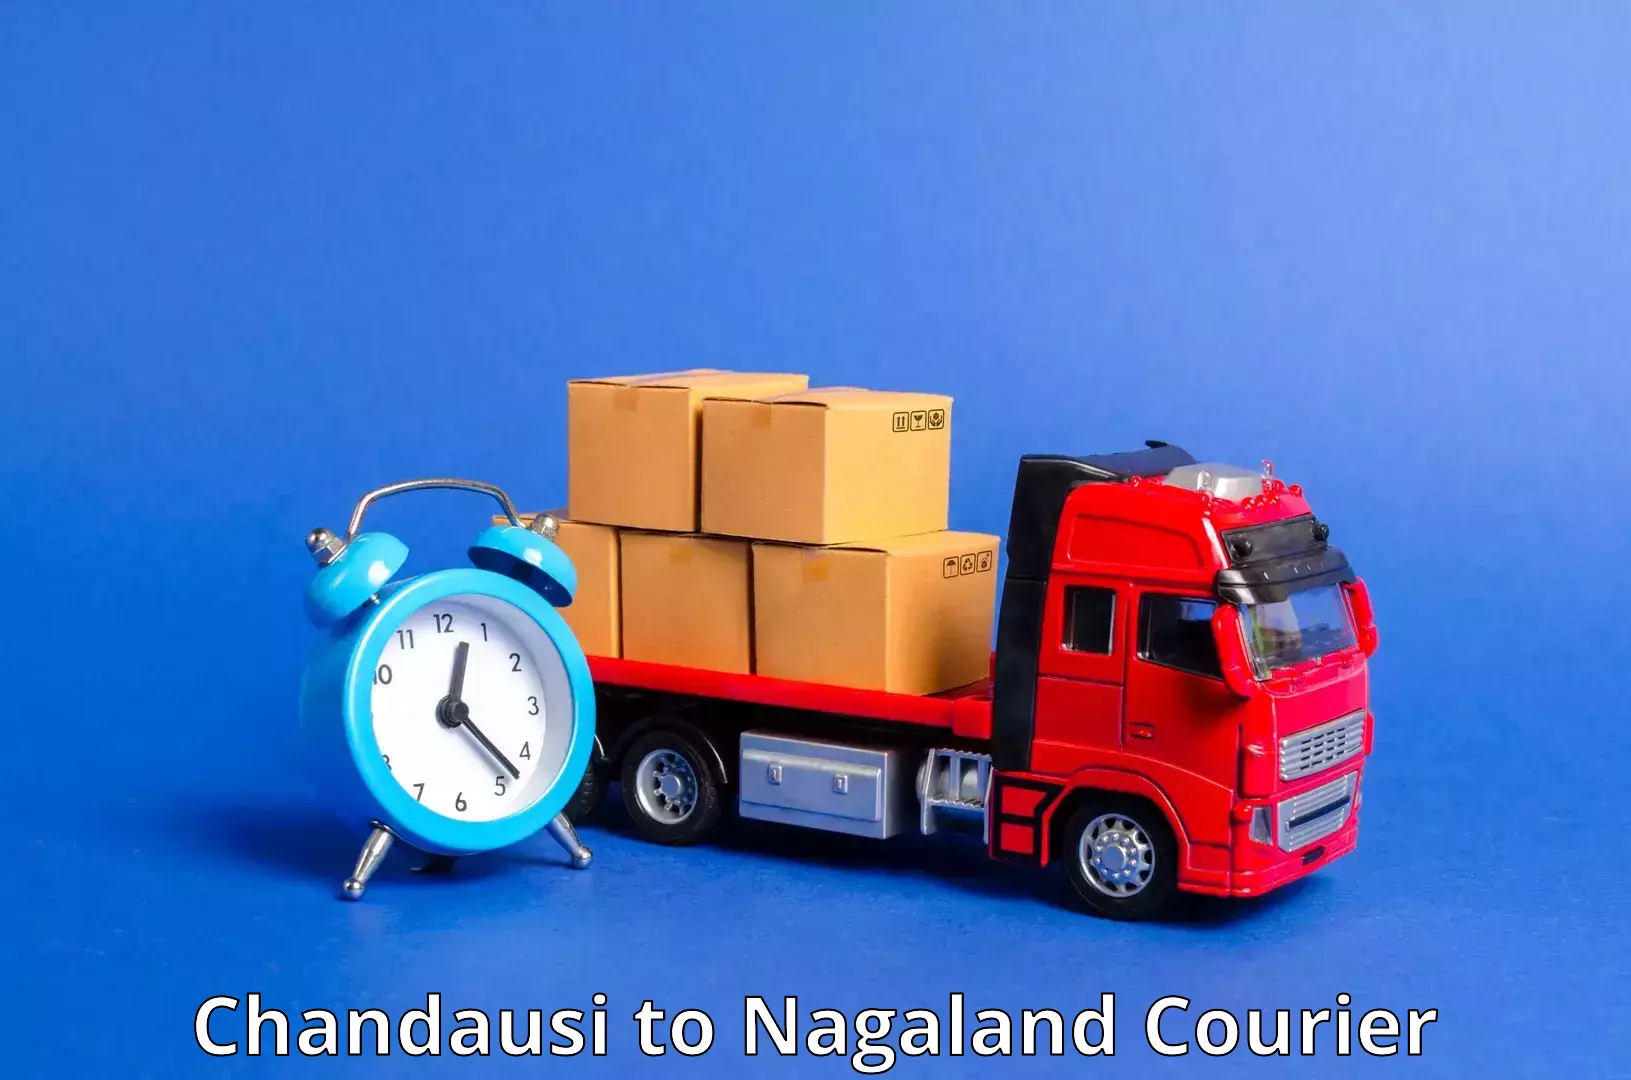 Multi-city courier Chandausi to Mon